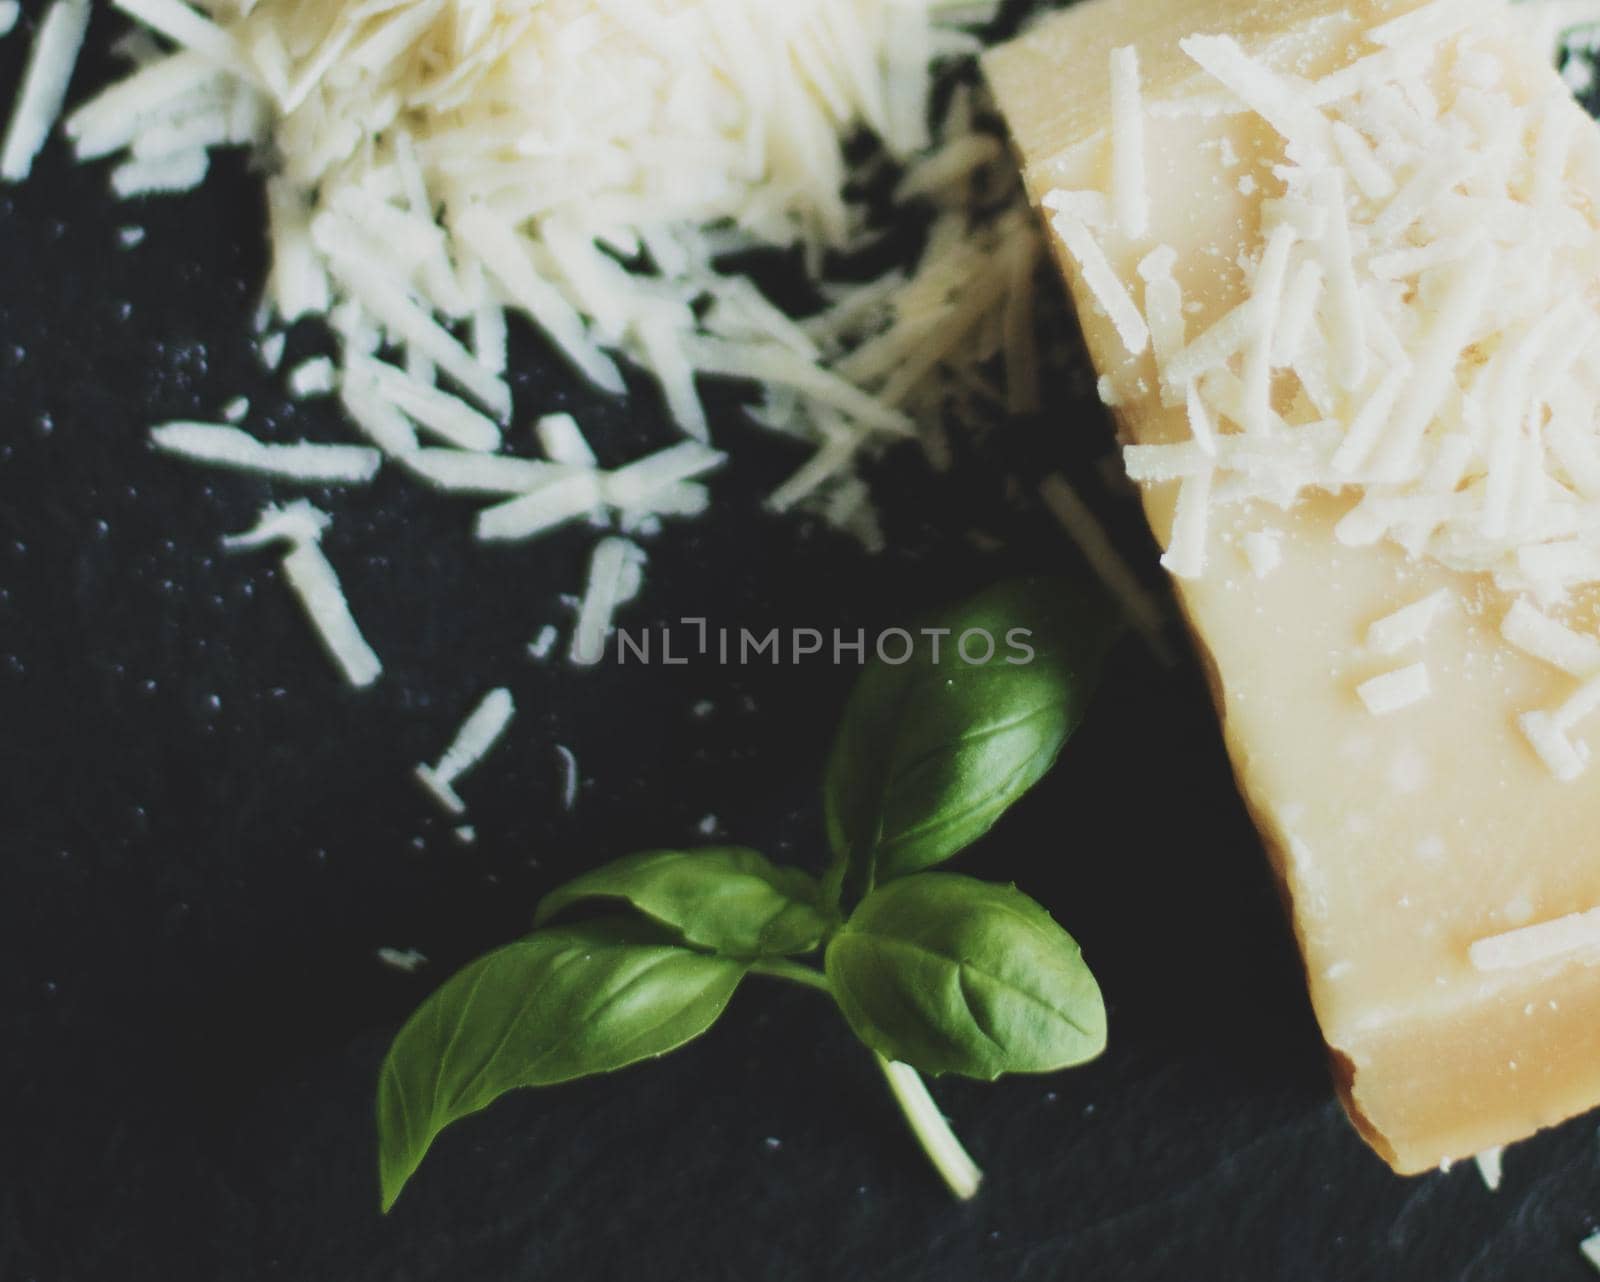 dairy and rustic farm food styled concept - shredded parmesan cheese, elegant visuals